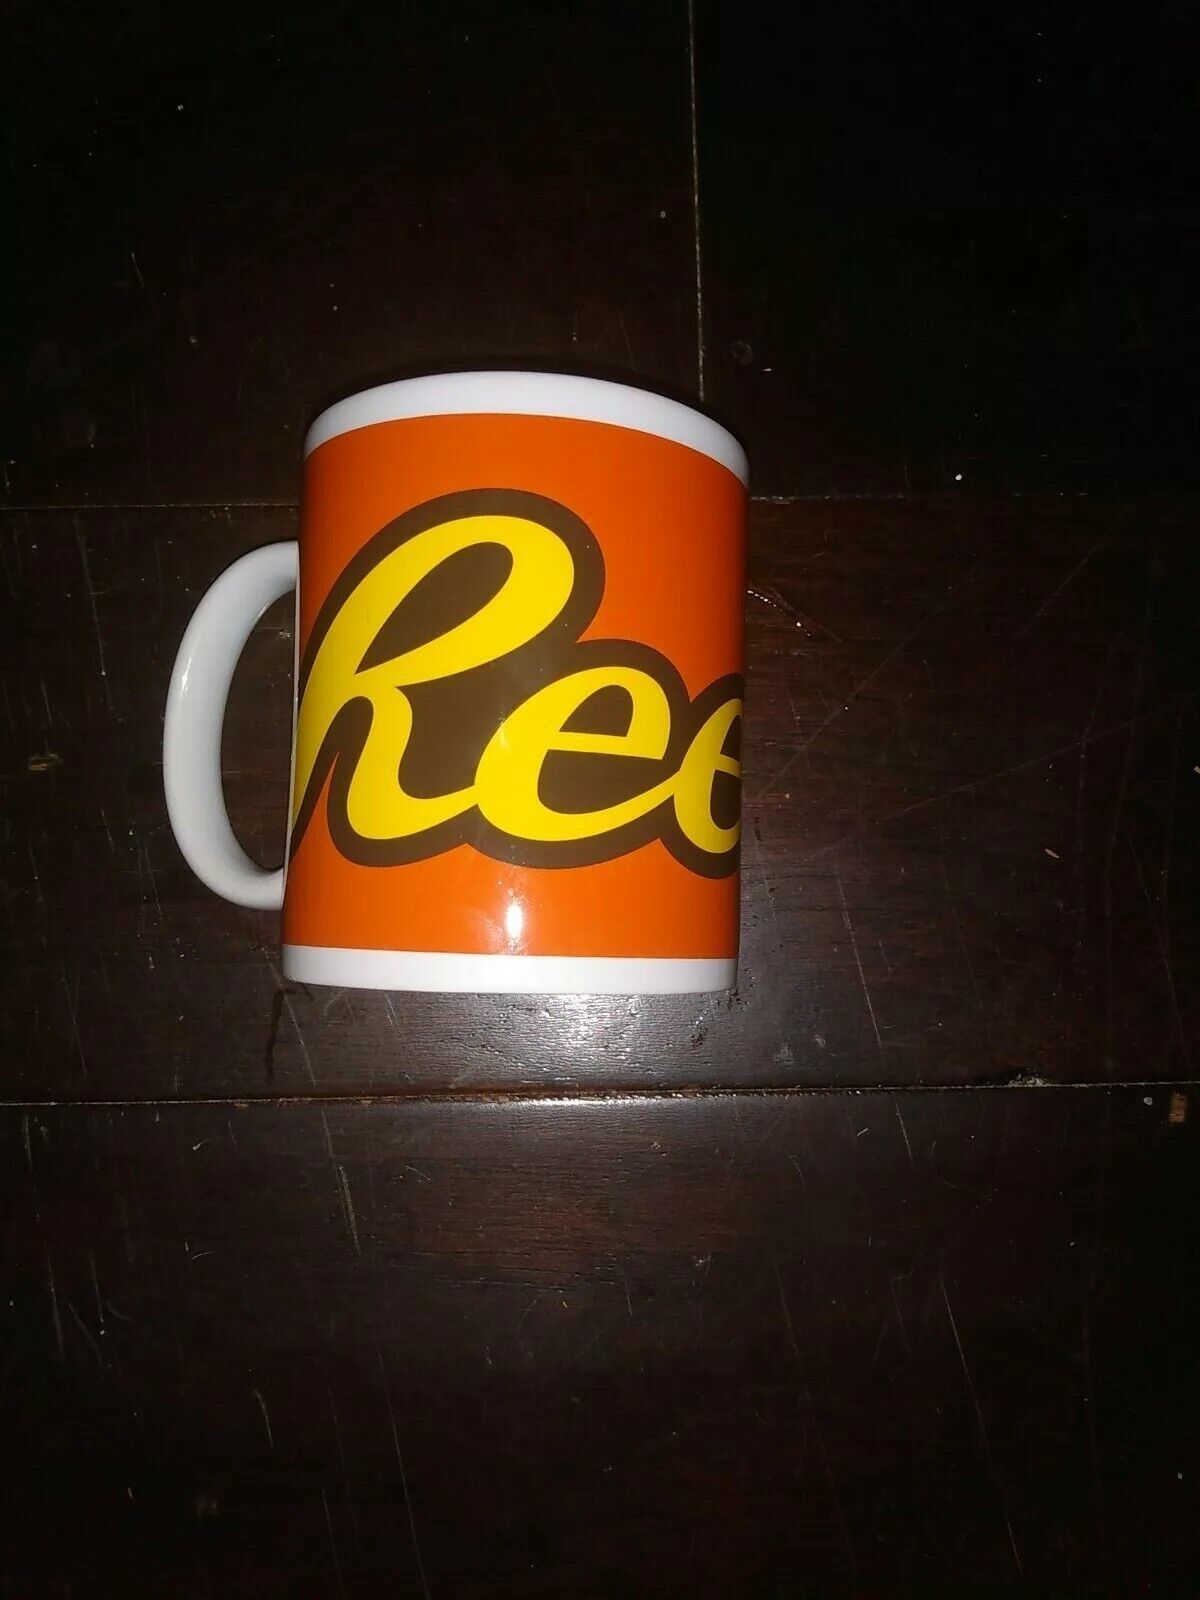 Reese’s Pieces Big Letter Peanut Butter Cup Coffee Mug 12 oz One Mug - $9.89